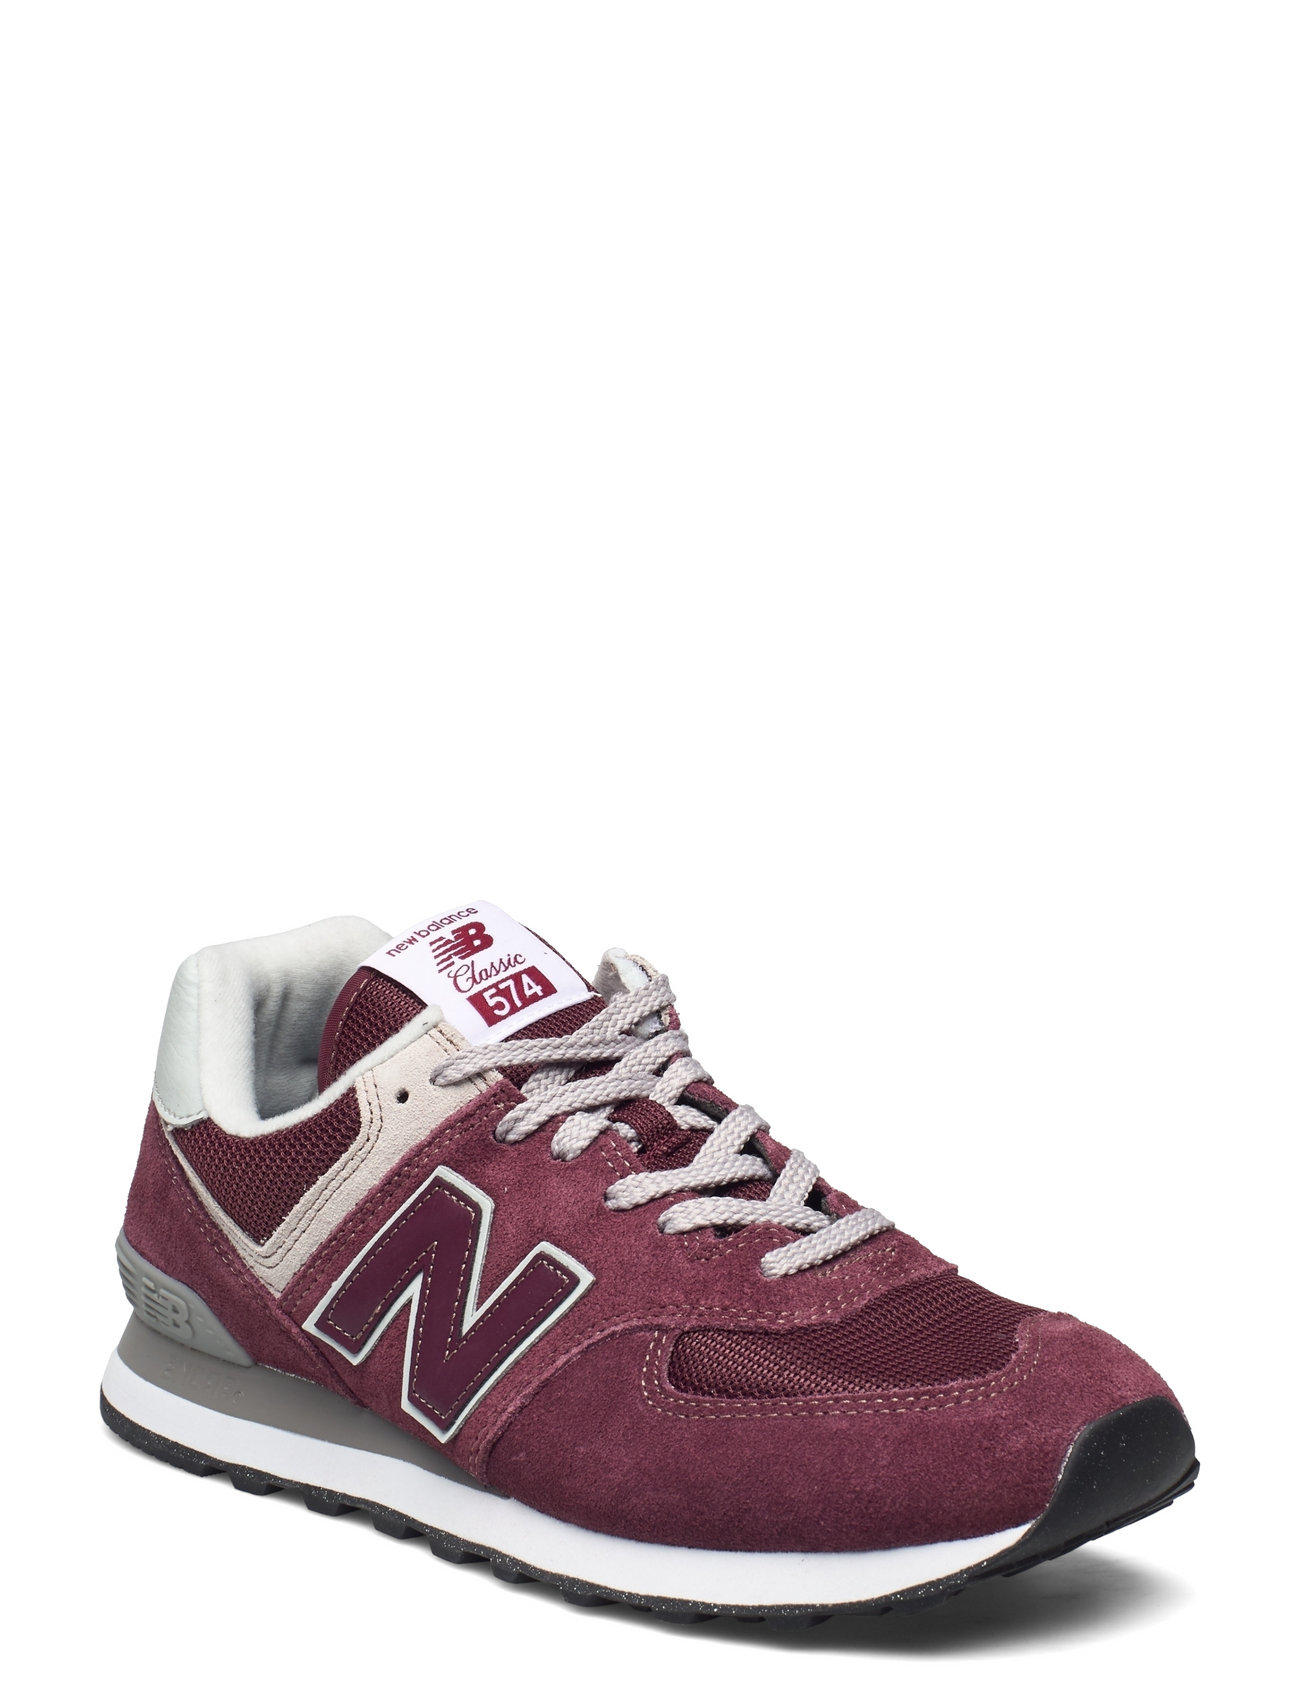 New Balance 574 Sport Sneakers Low-top Sneakers Red New Balance